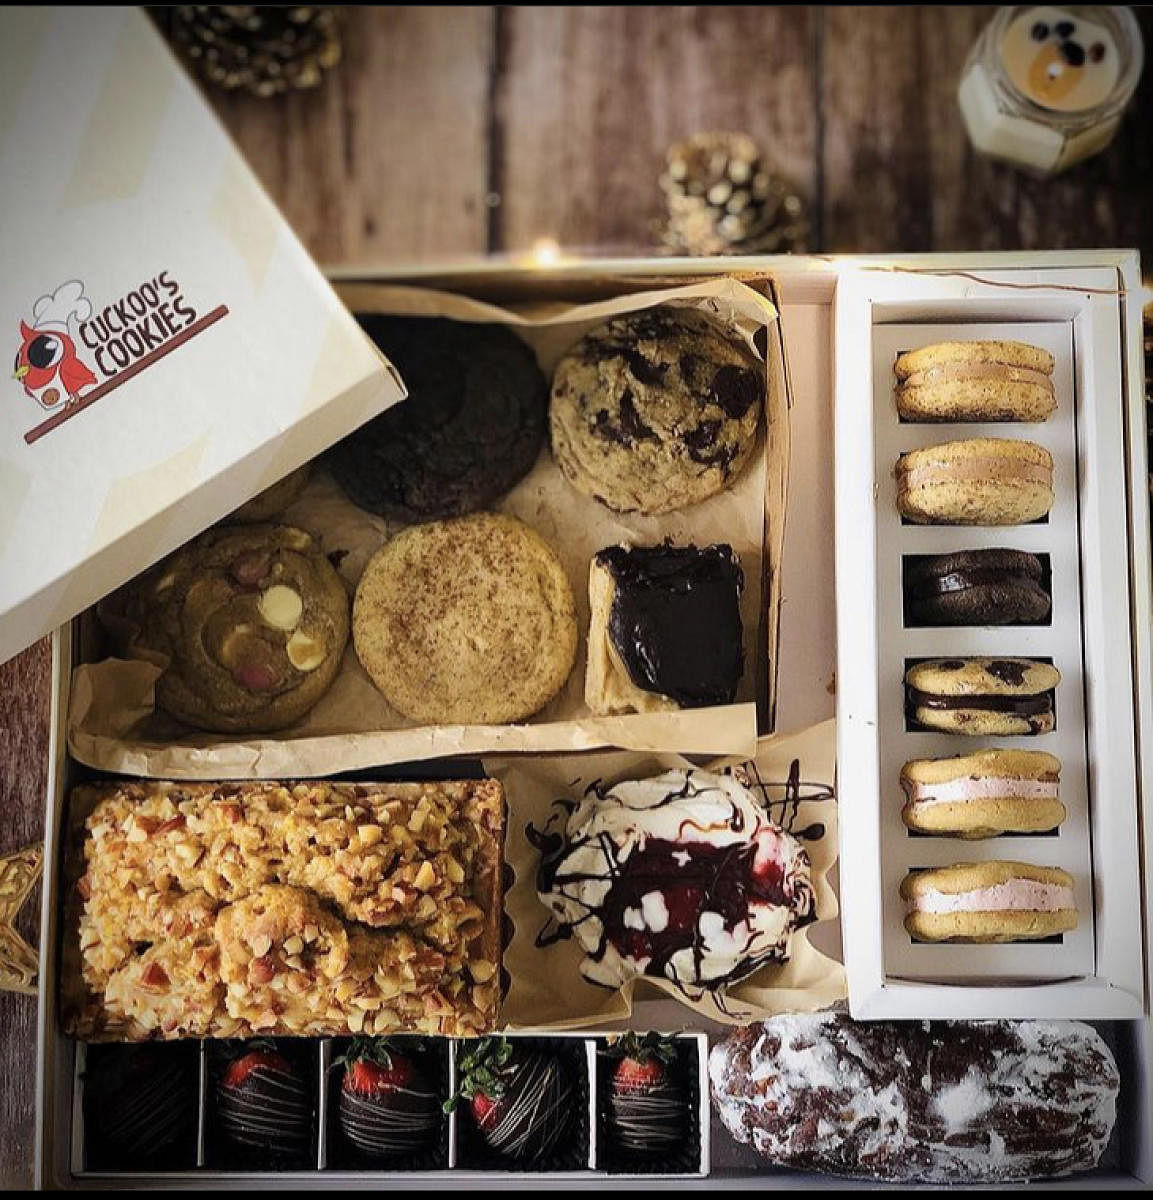 Cuckoo’s Cookies will be crafting three hampers with a mix of their signature offerings and Christmas specials. (inset) Deeksha Ravi